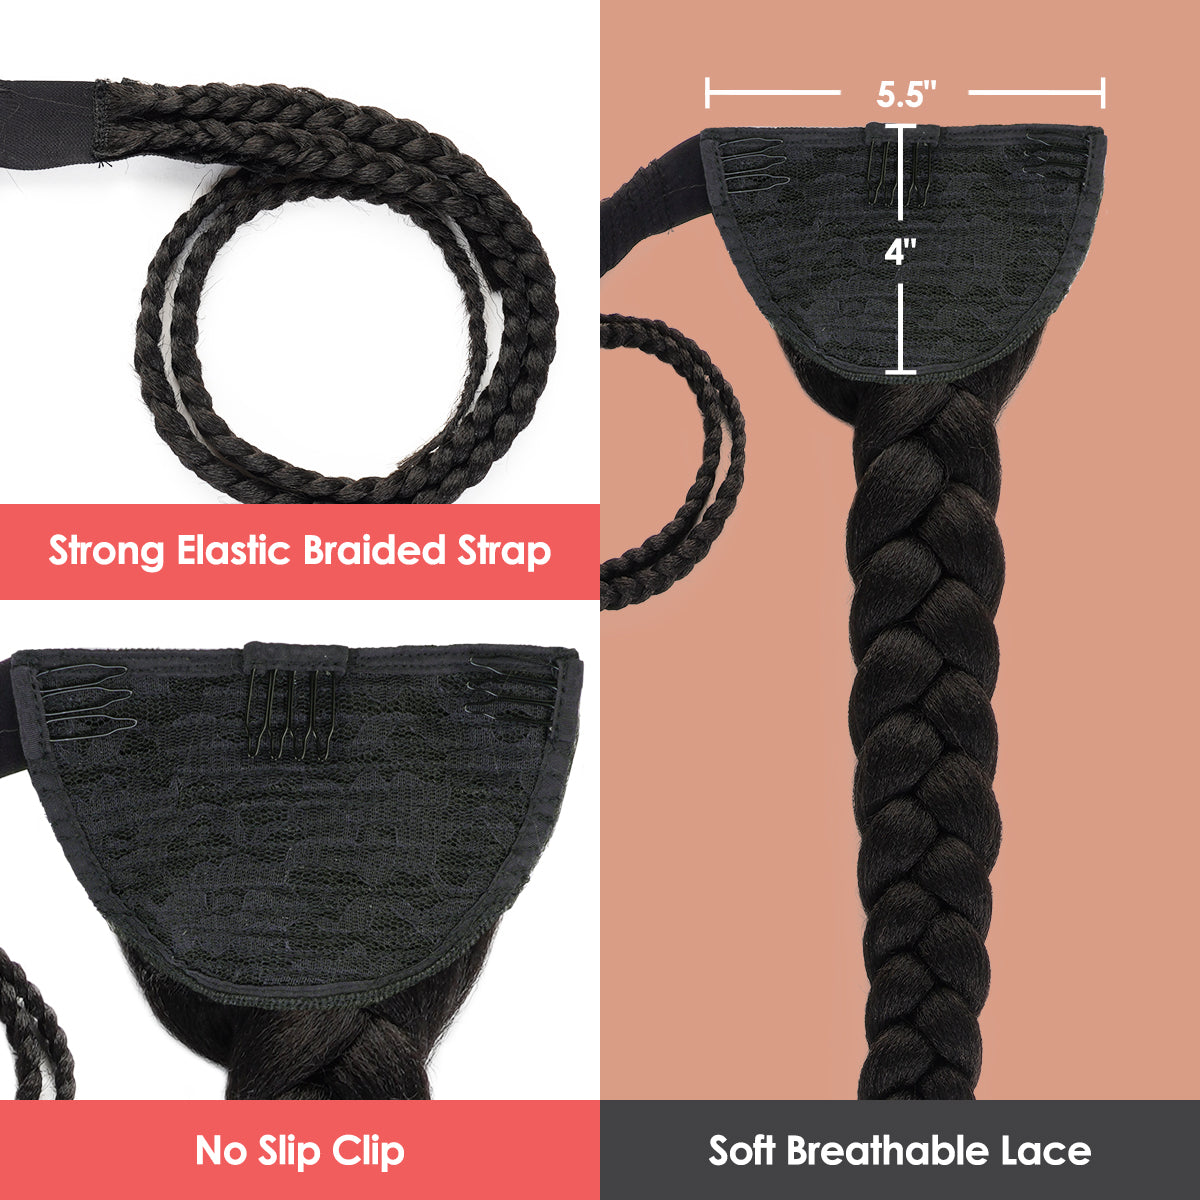 braided ponytail with strong elastic braided strap, ponytail that does not slip, no slip clip attached, ponytail with soft breathable lace 